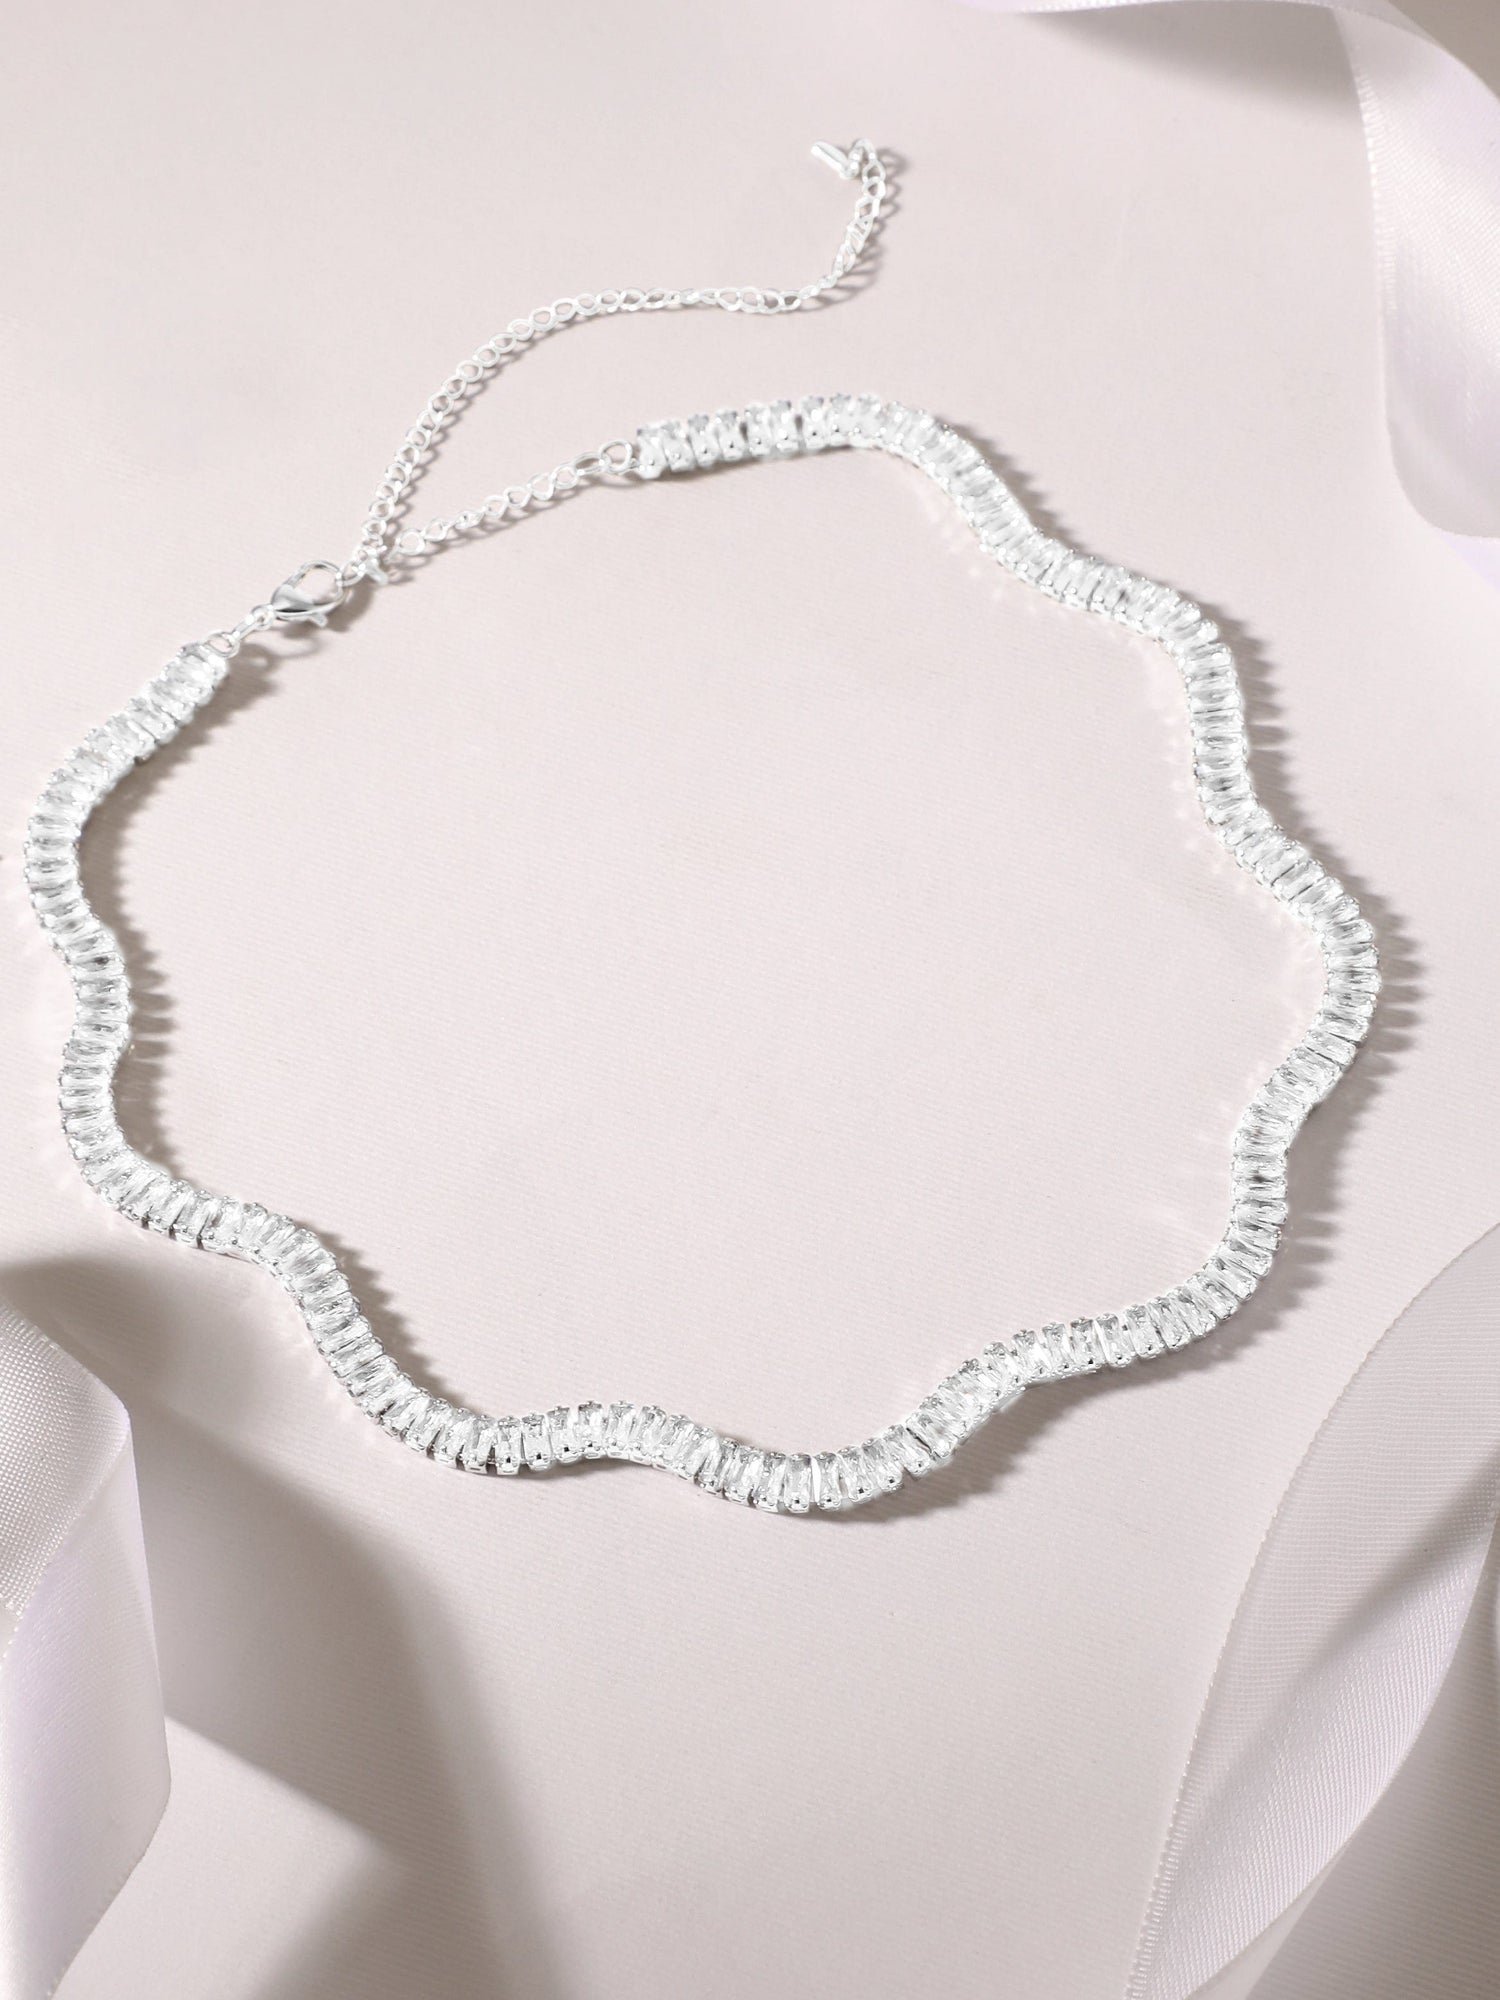 Rubans Voguish Silver Toned With Baguette Stones Studded Choker Necklace. Chain &amp; Necklaces